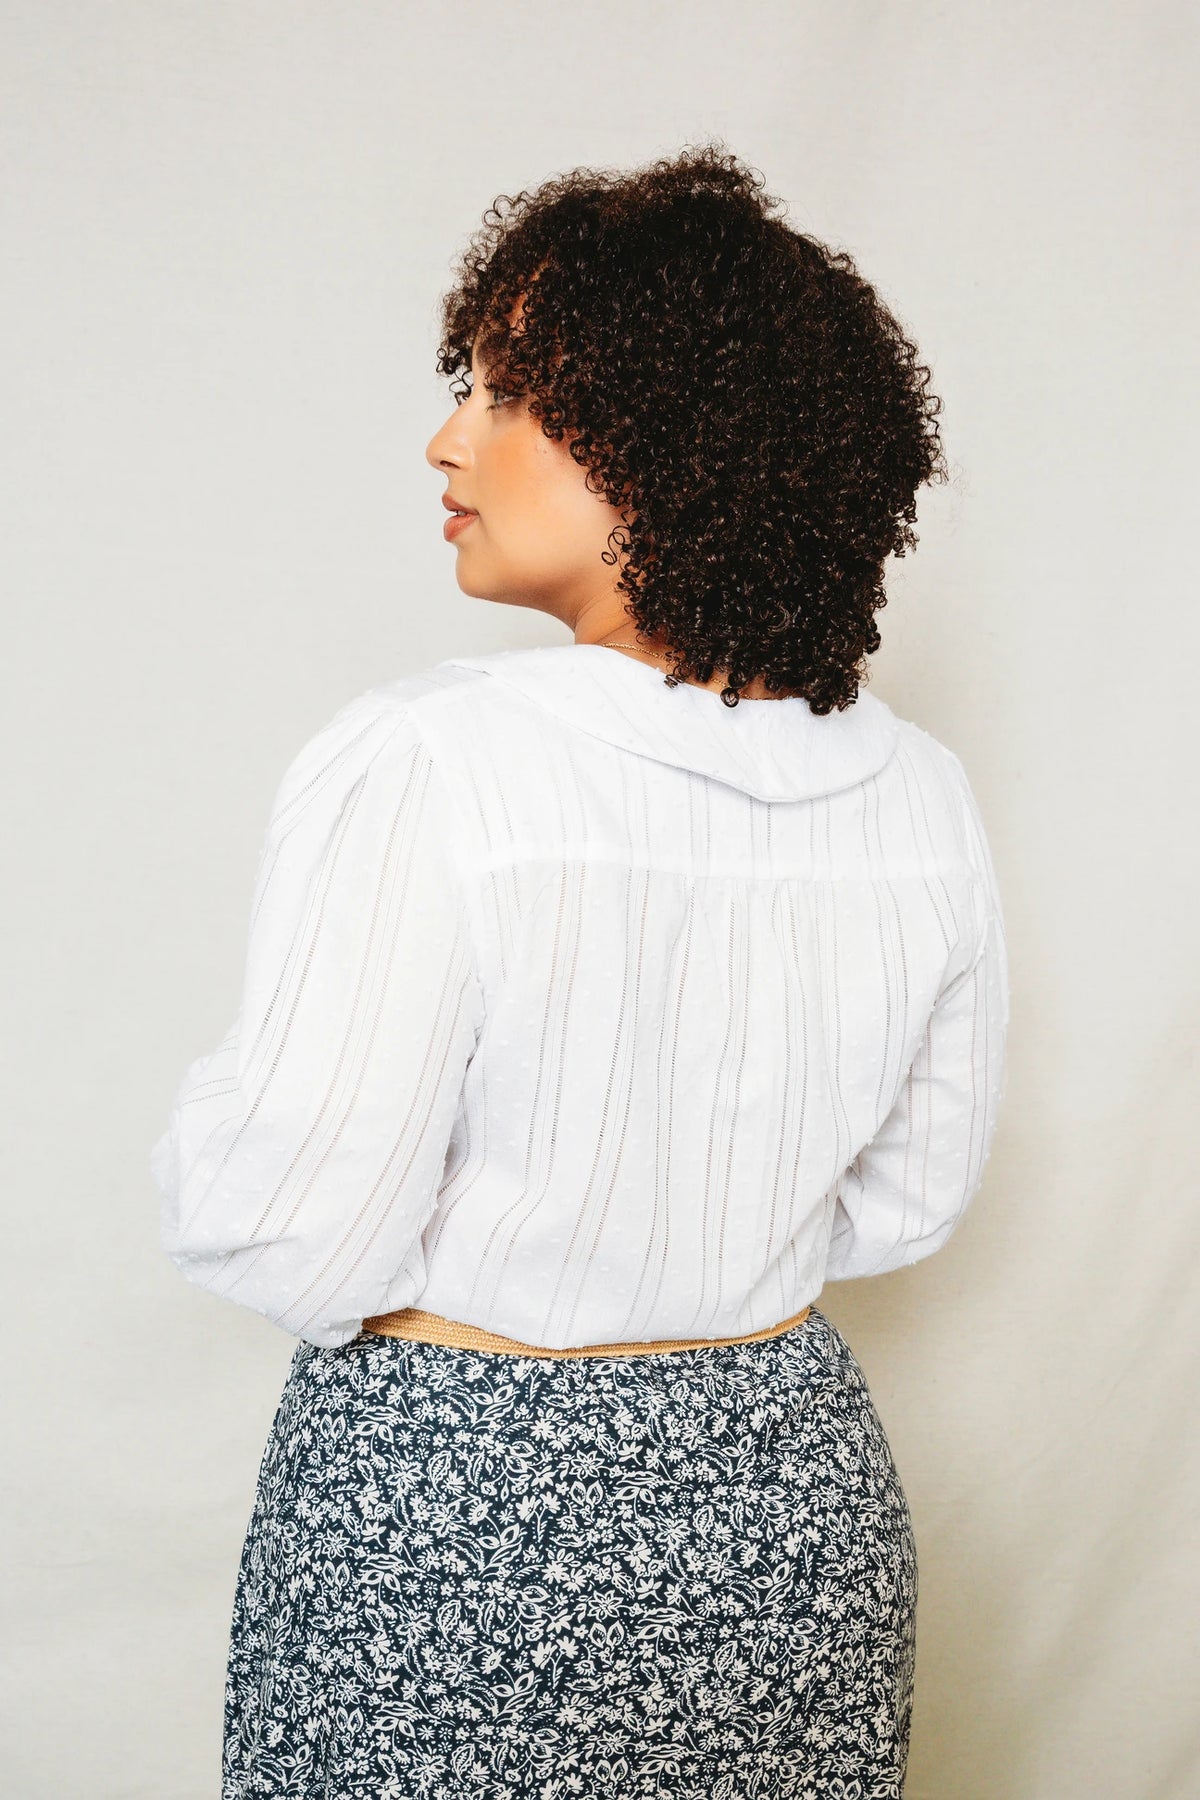 The Patina Blouse Sewing Pattern by Friday Pattern Co.